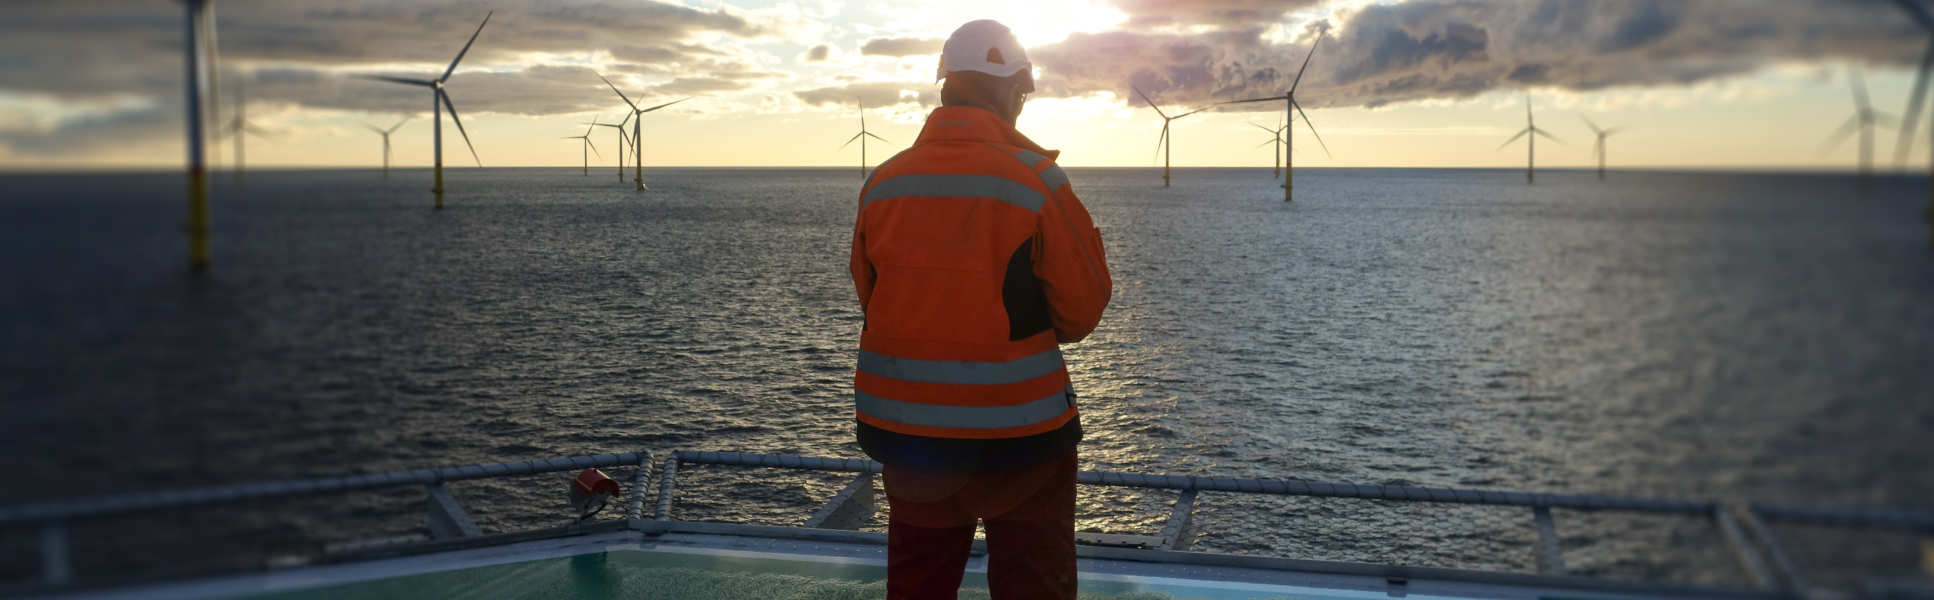 Man on a platform at sea looking out at offshore wind turbines